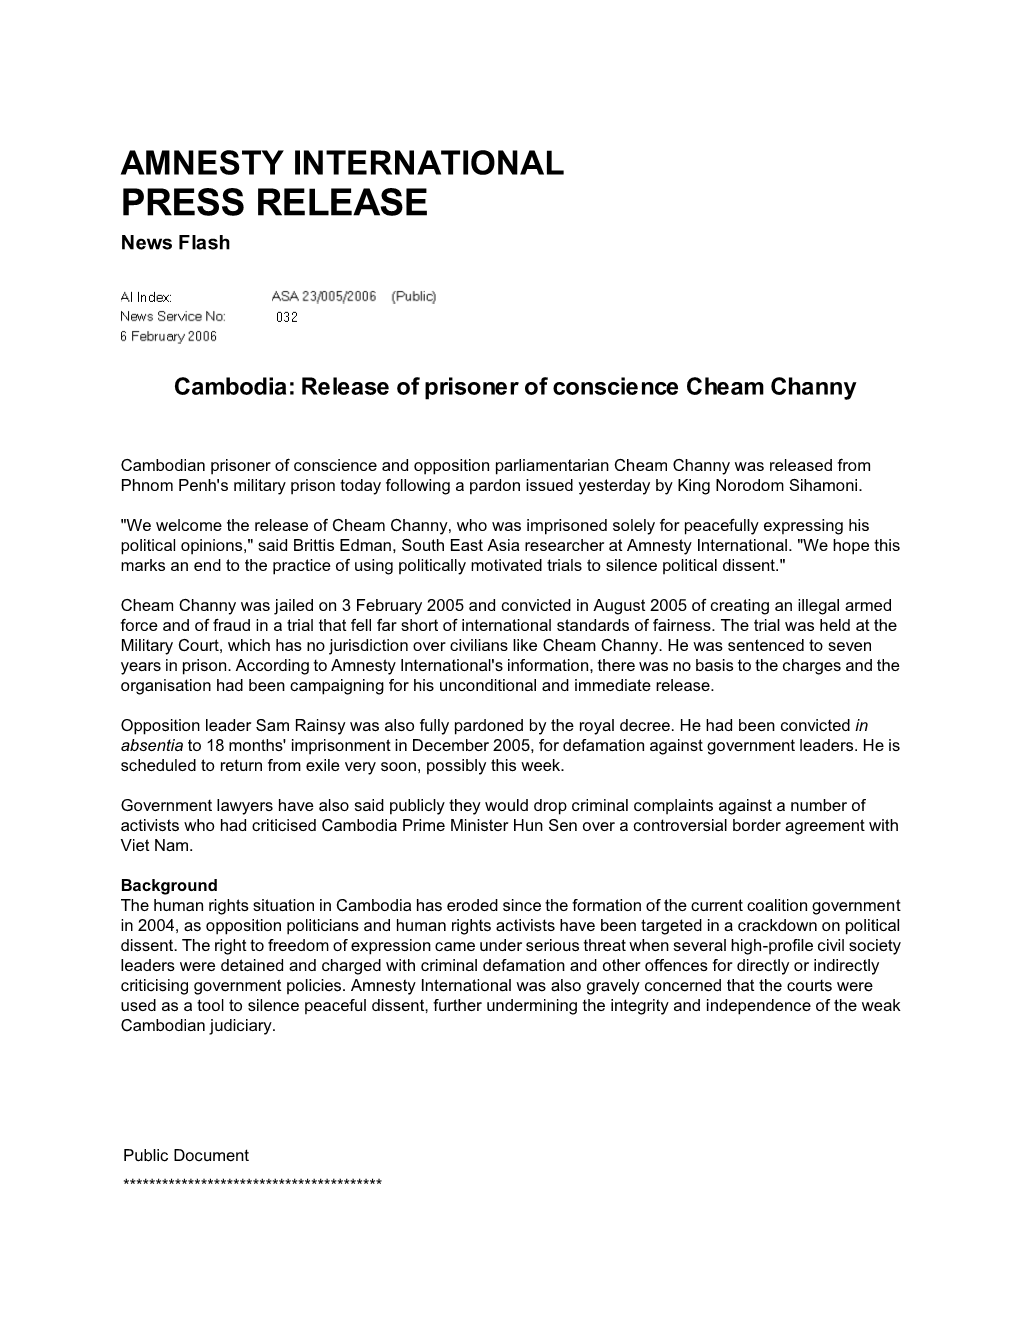 Release of Prisoner of Conscience Cheam Channy